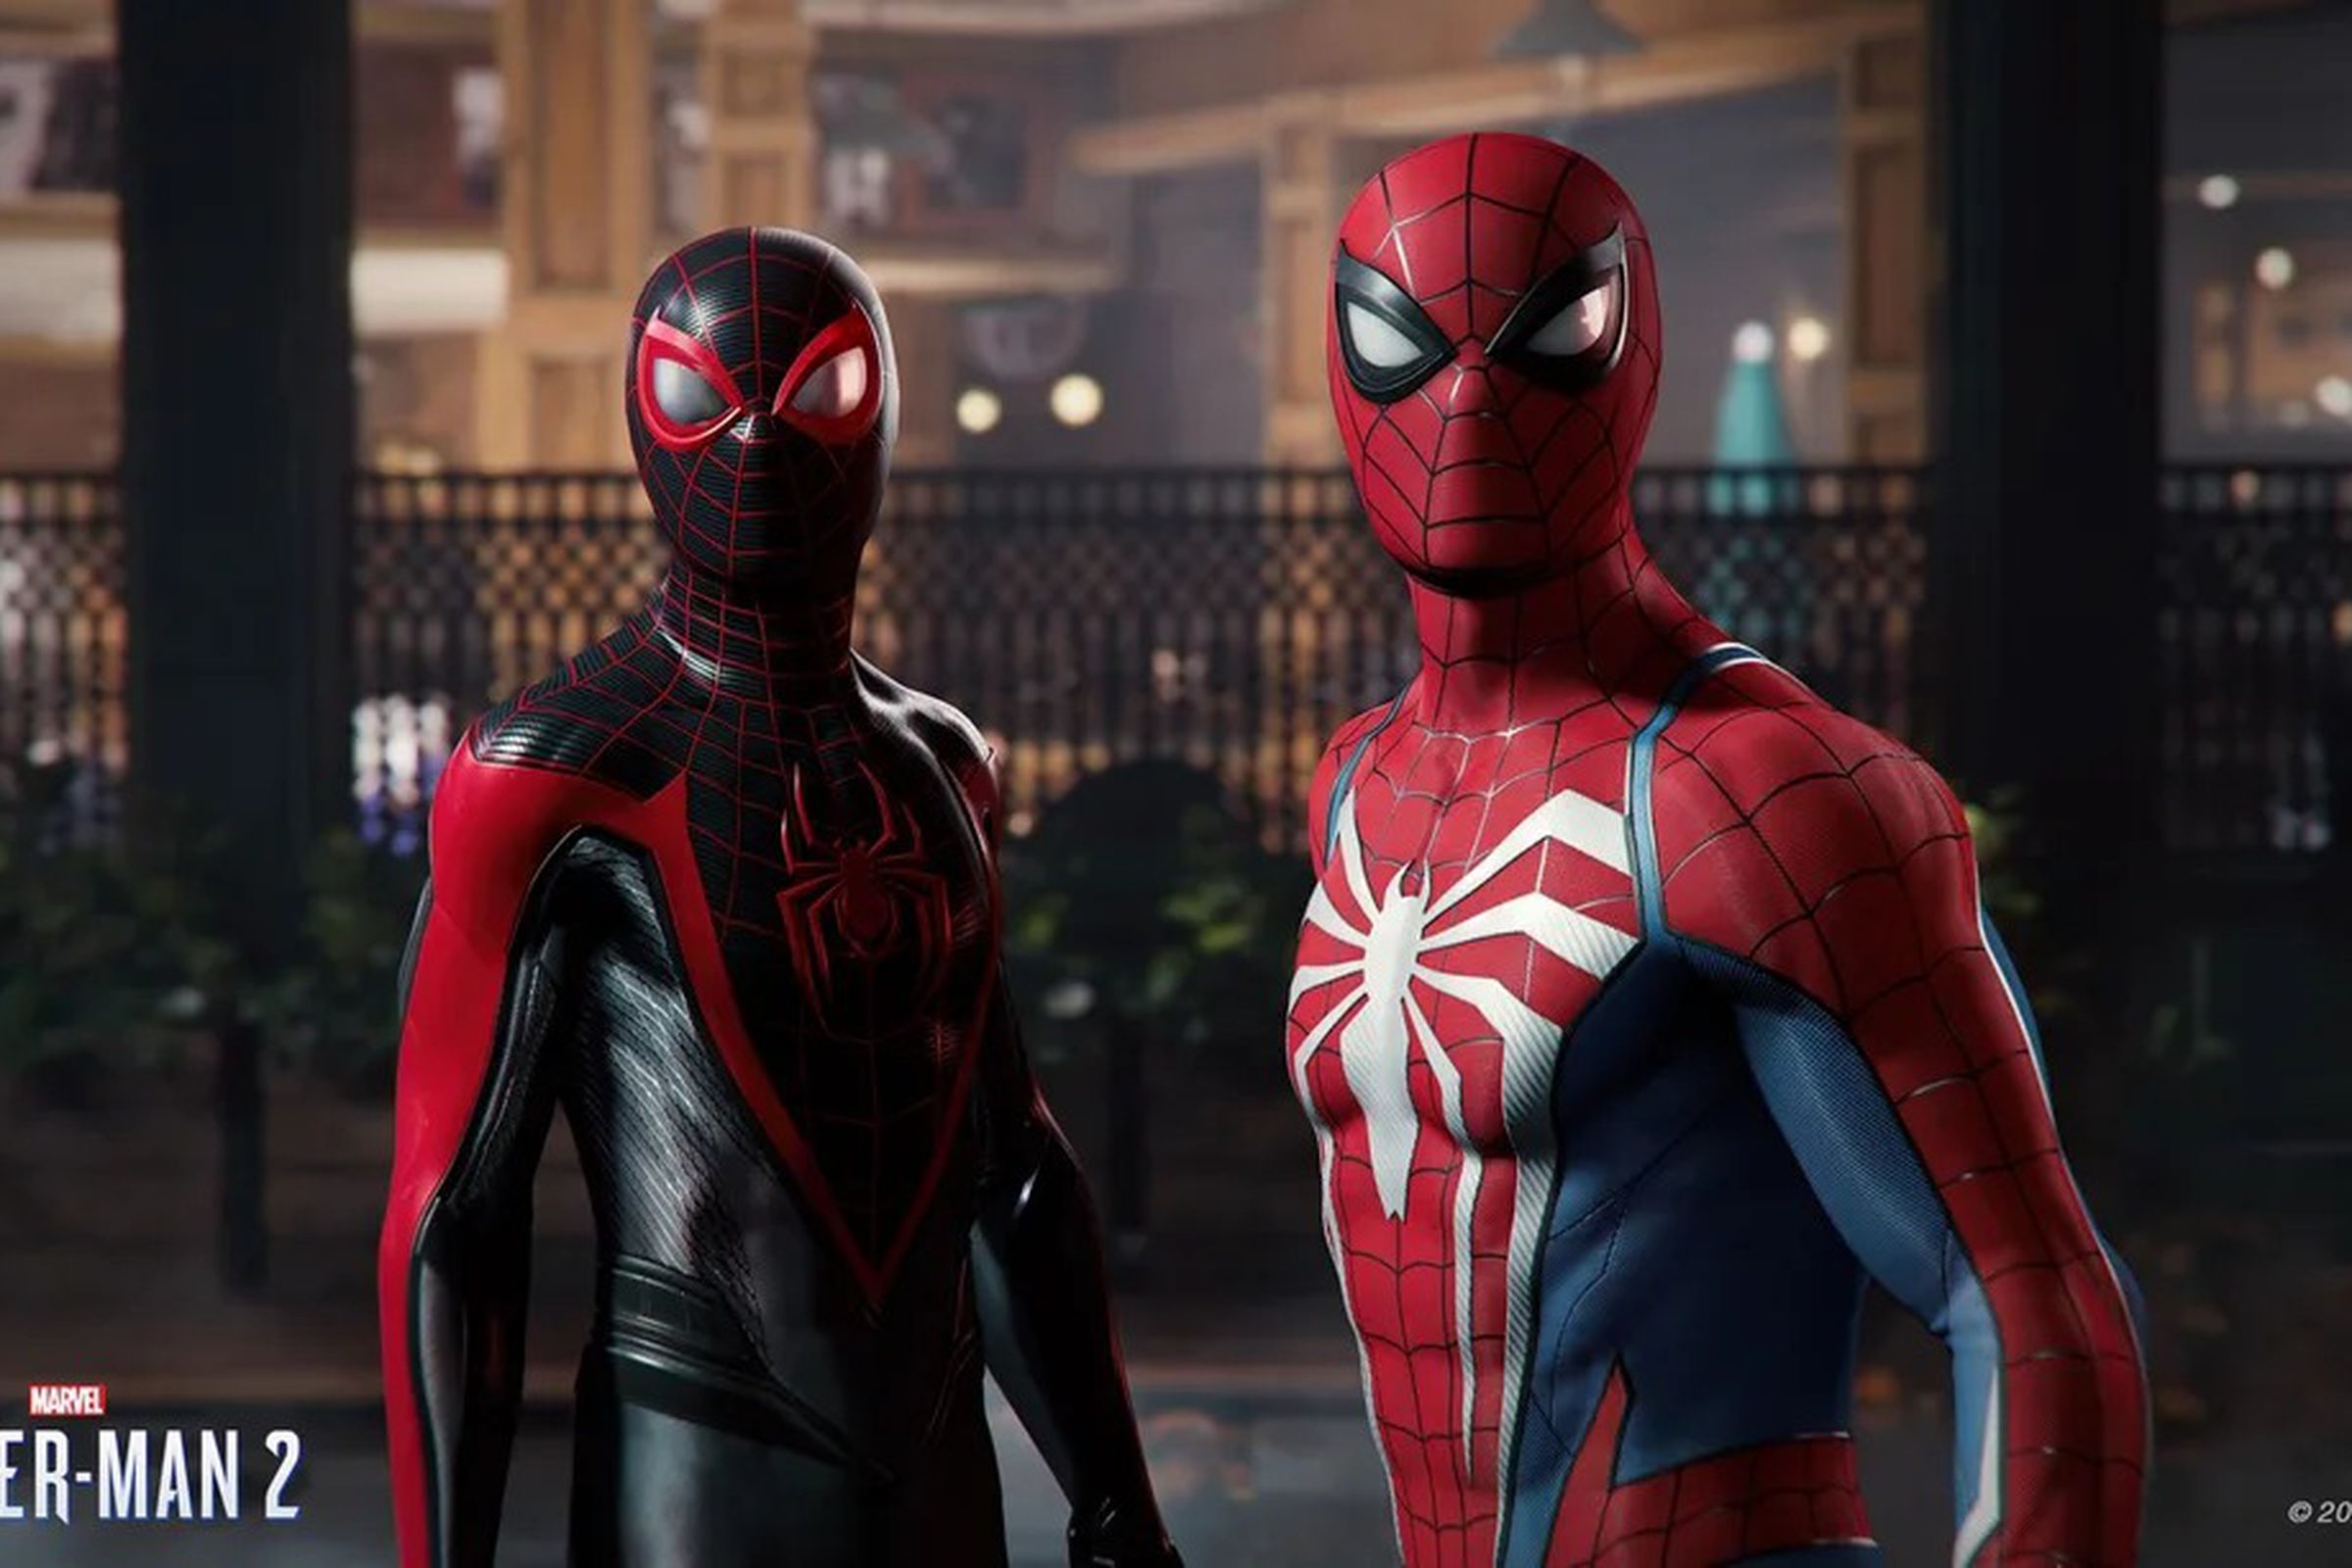 A screenshot from Marvel’s Spider-Man 2.